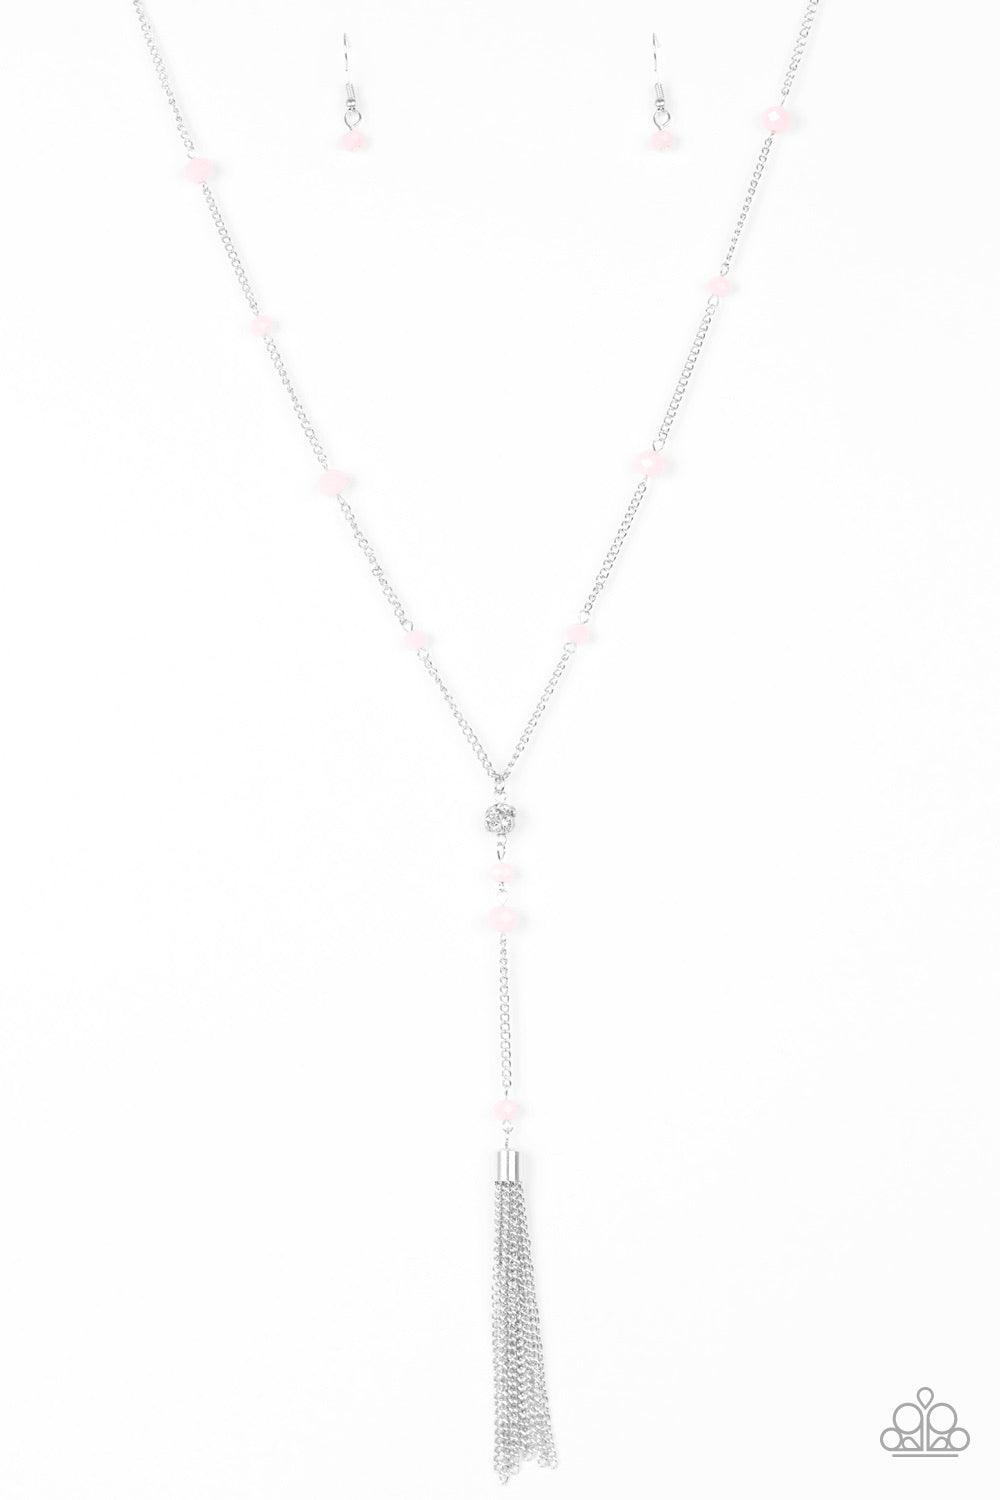 Paparazzi Accessories Out All Night - Pink Pink crystal-like beads trickle down a shimmery silver chain. Encrusted in white rhinestones, a silver bead gives way to a chain extension dotted in matching crystal beads for an elegant finish. Features an adjus